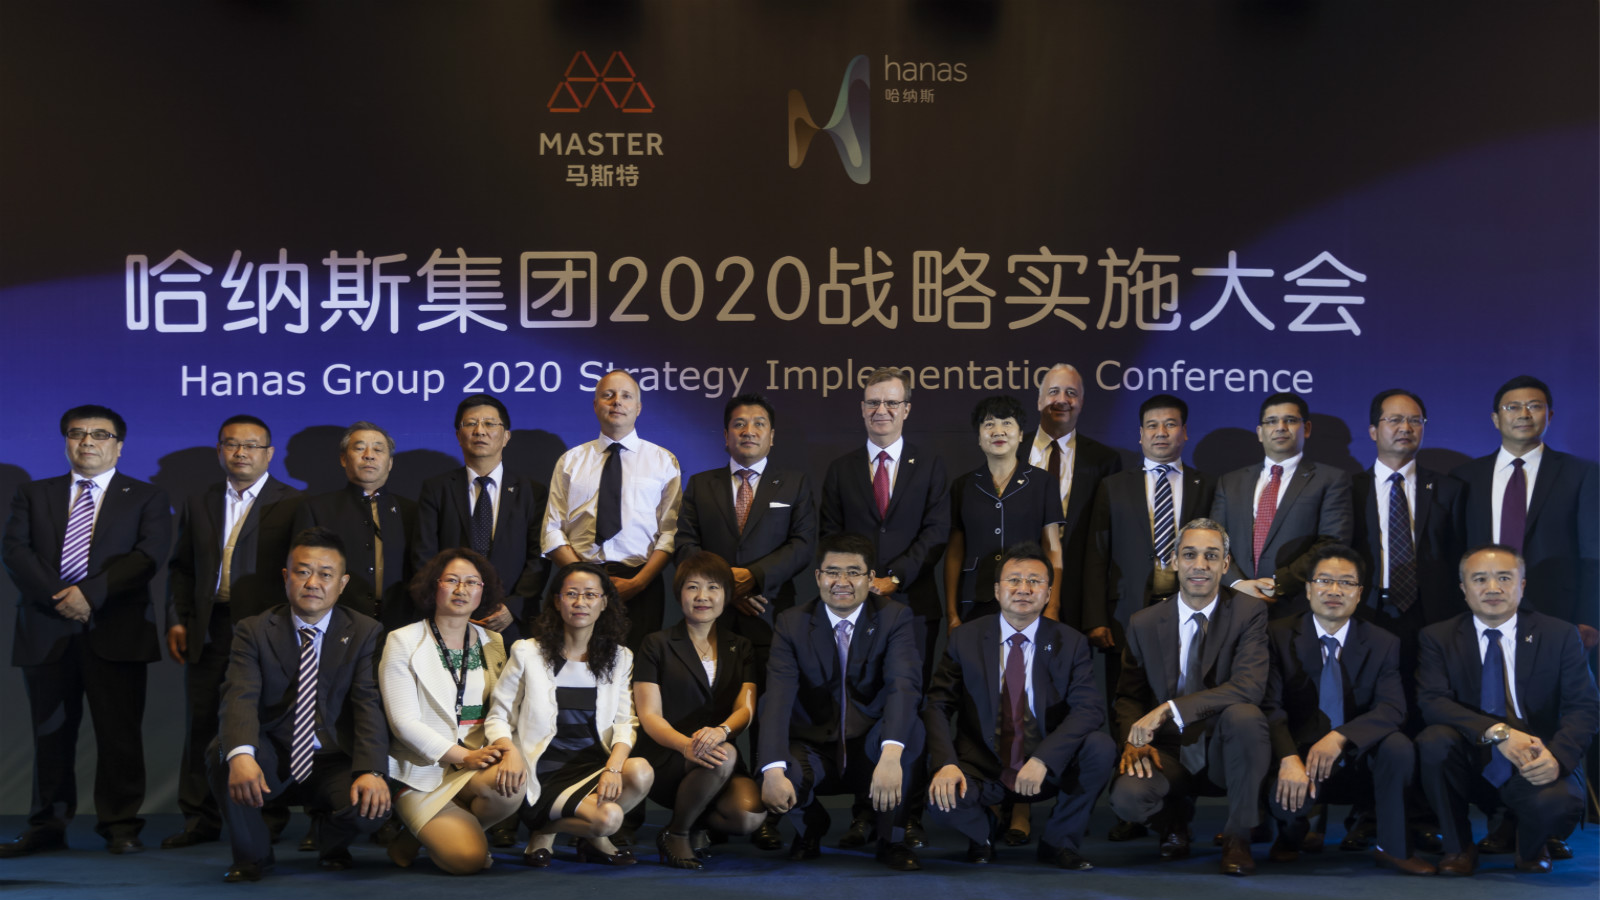 Hanas Group 2020 Strategy Implementation Conference was rounded off